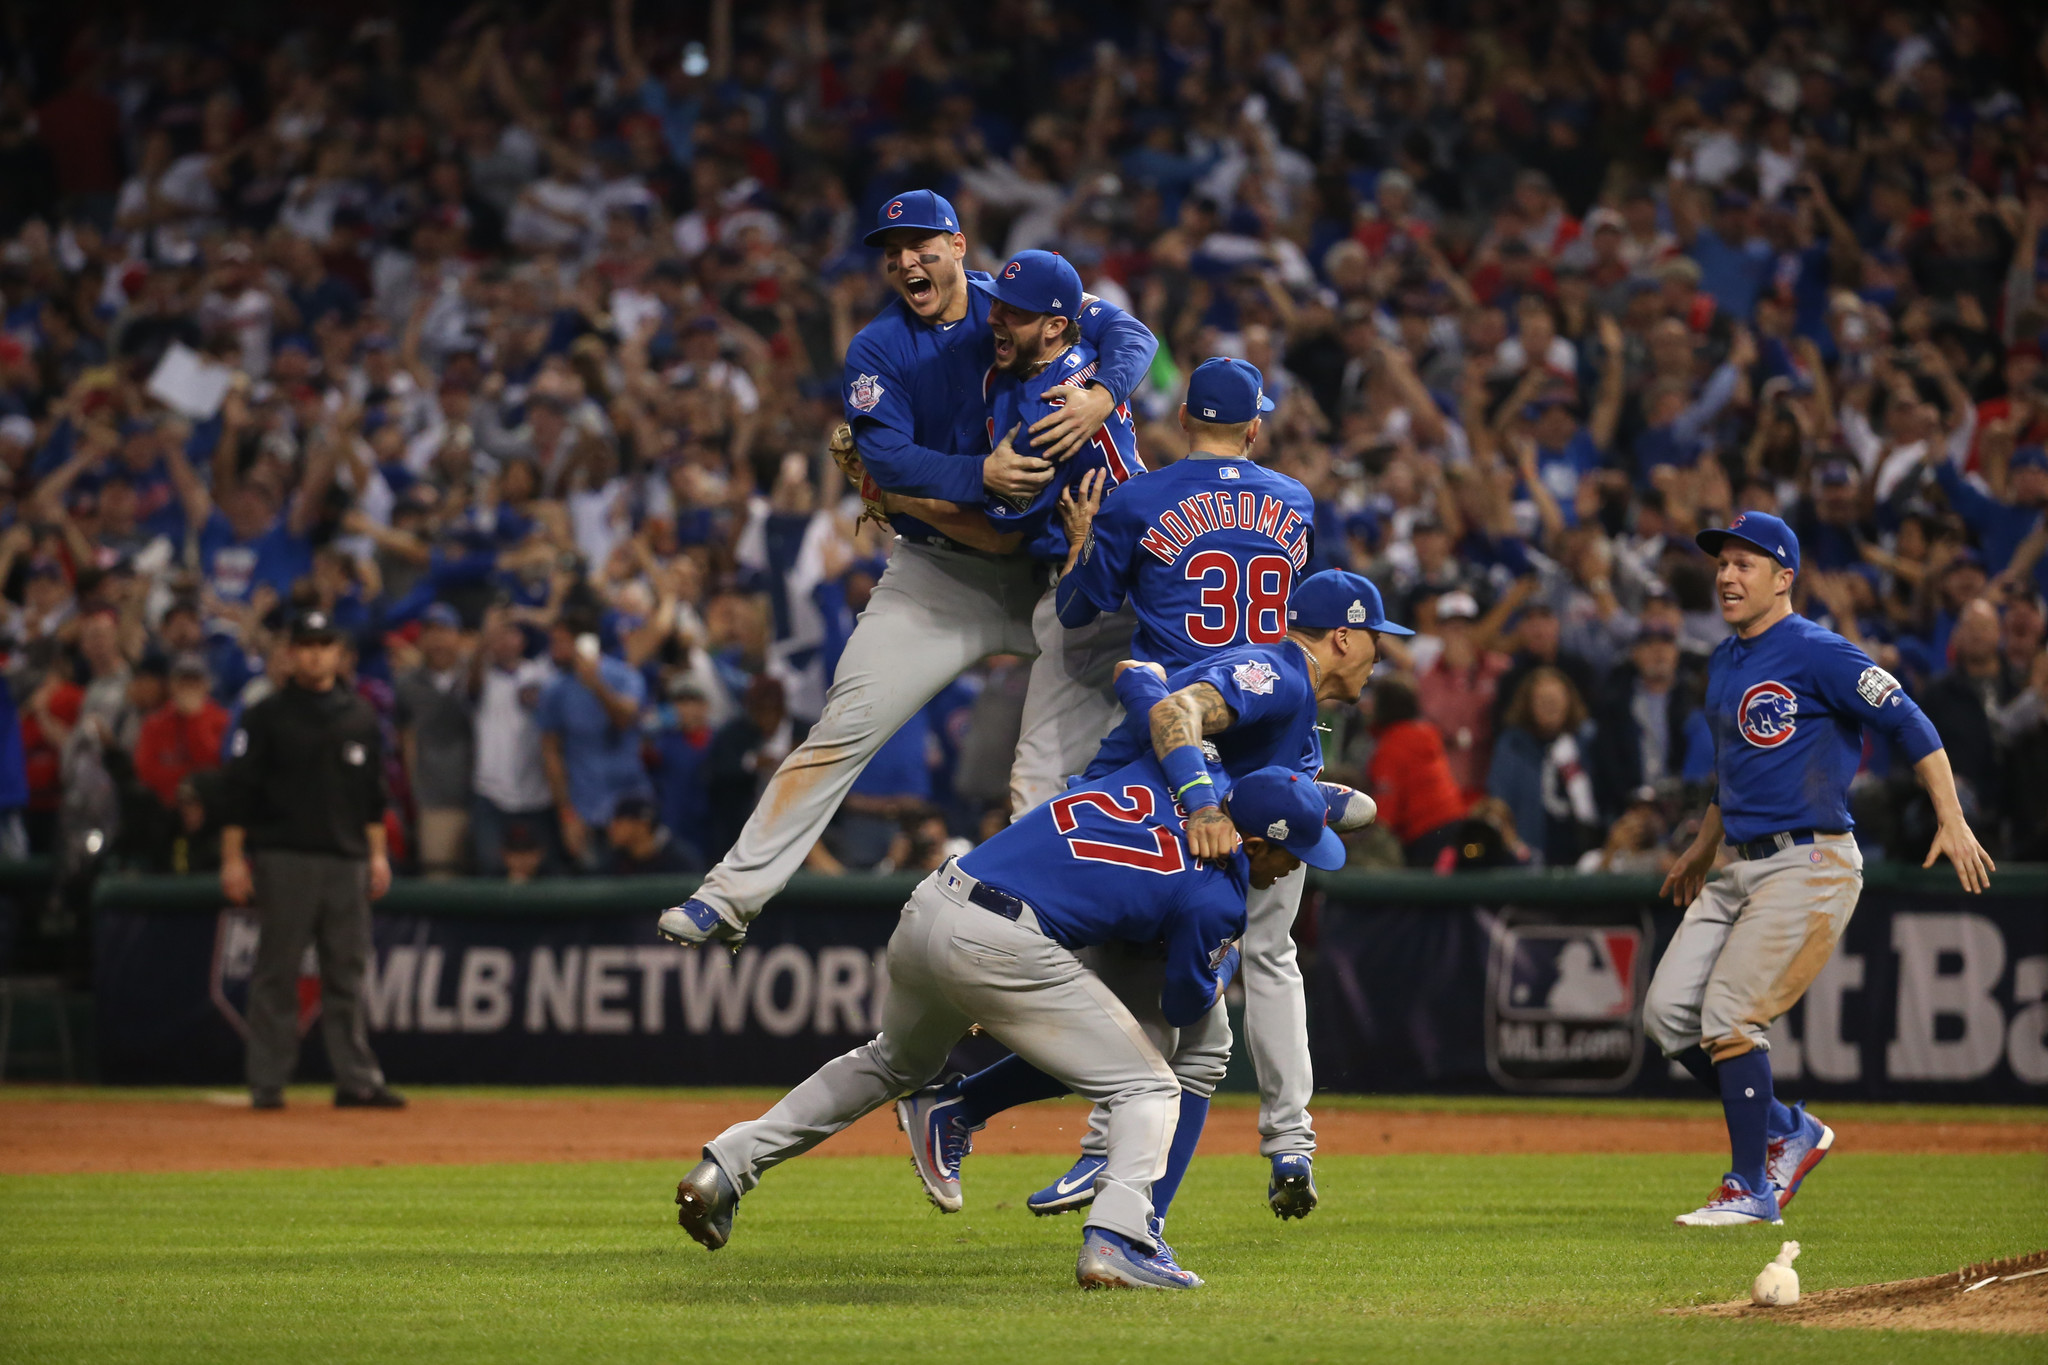 Chicago Cubs, World Series champions: Game 7 provides excruciating final  test